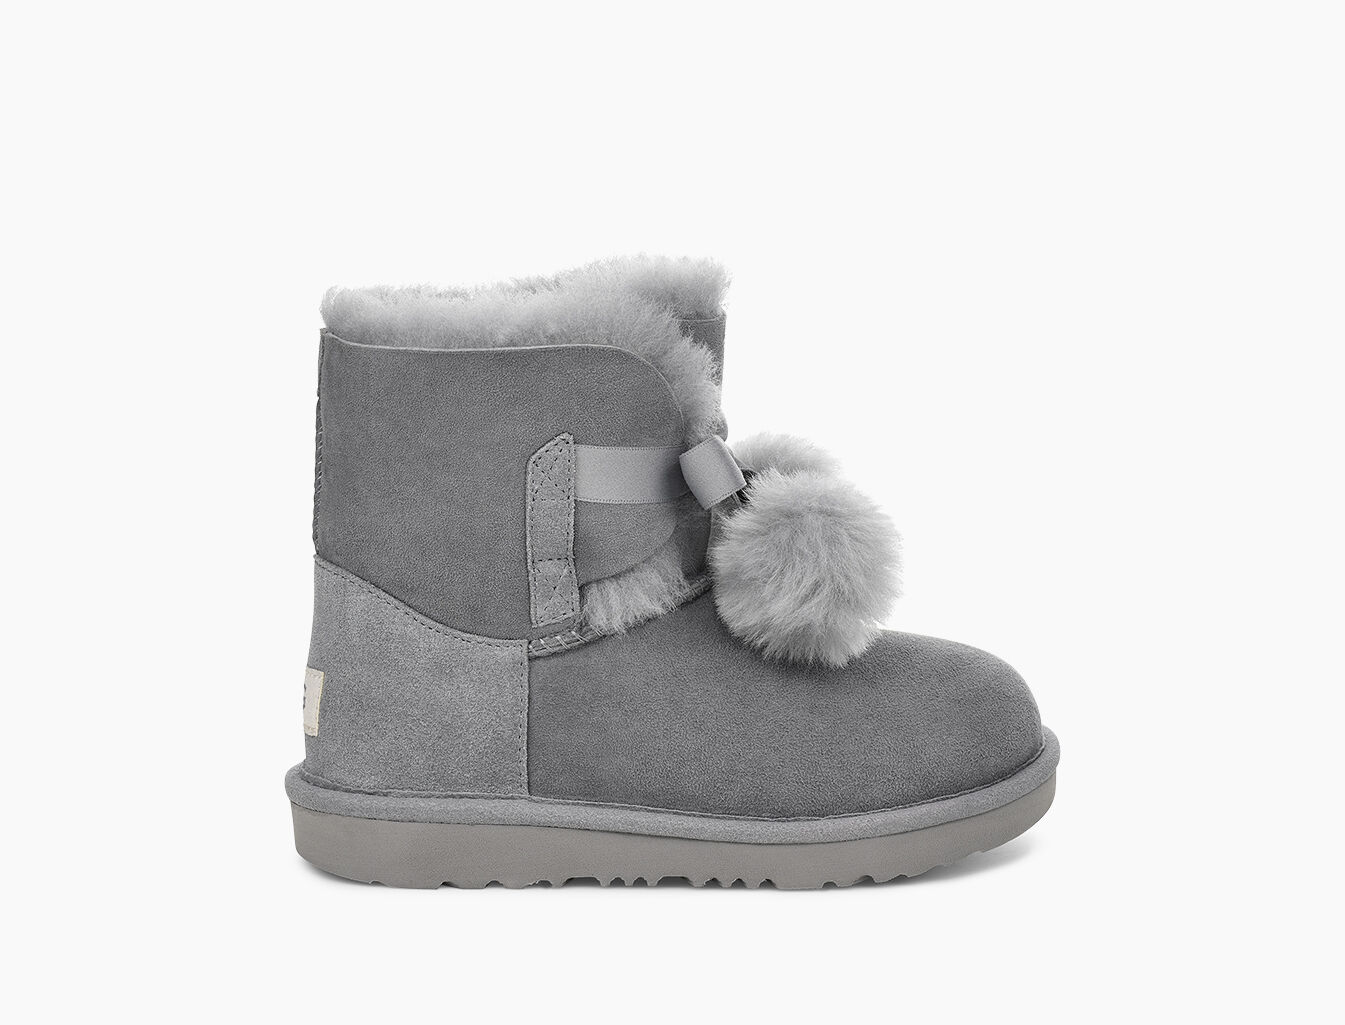 cheap ugg boots for toddlers